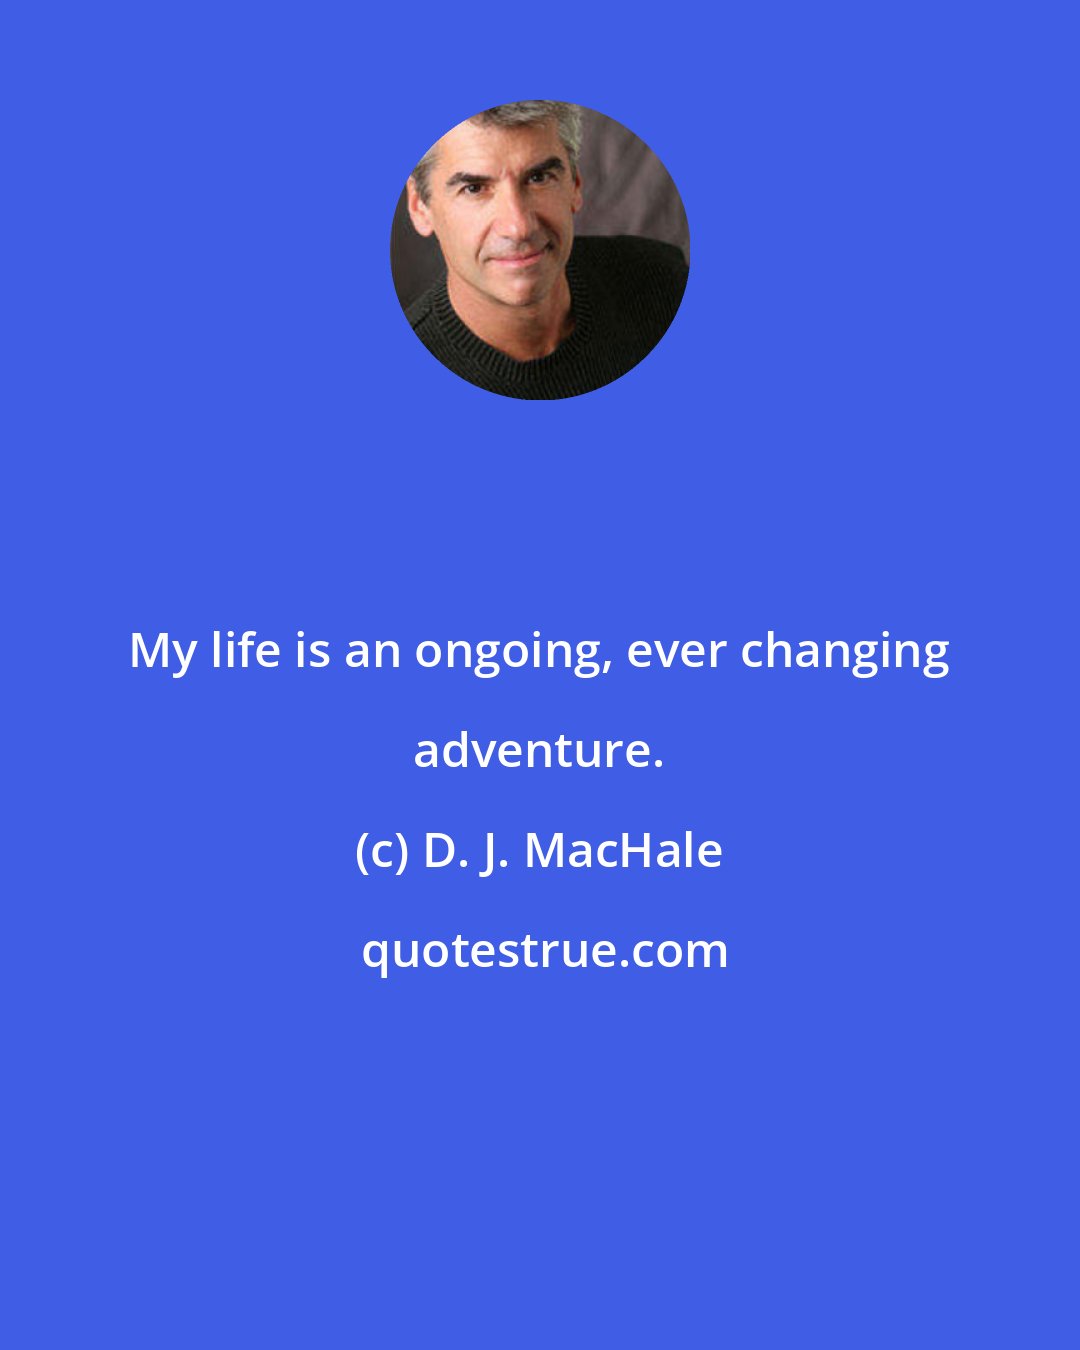 D. J. MacHale: My life is an ongoing, ever changing adventure.